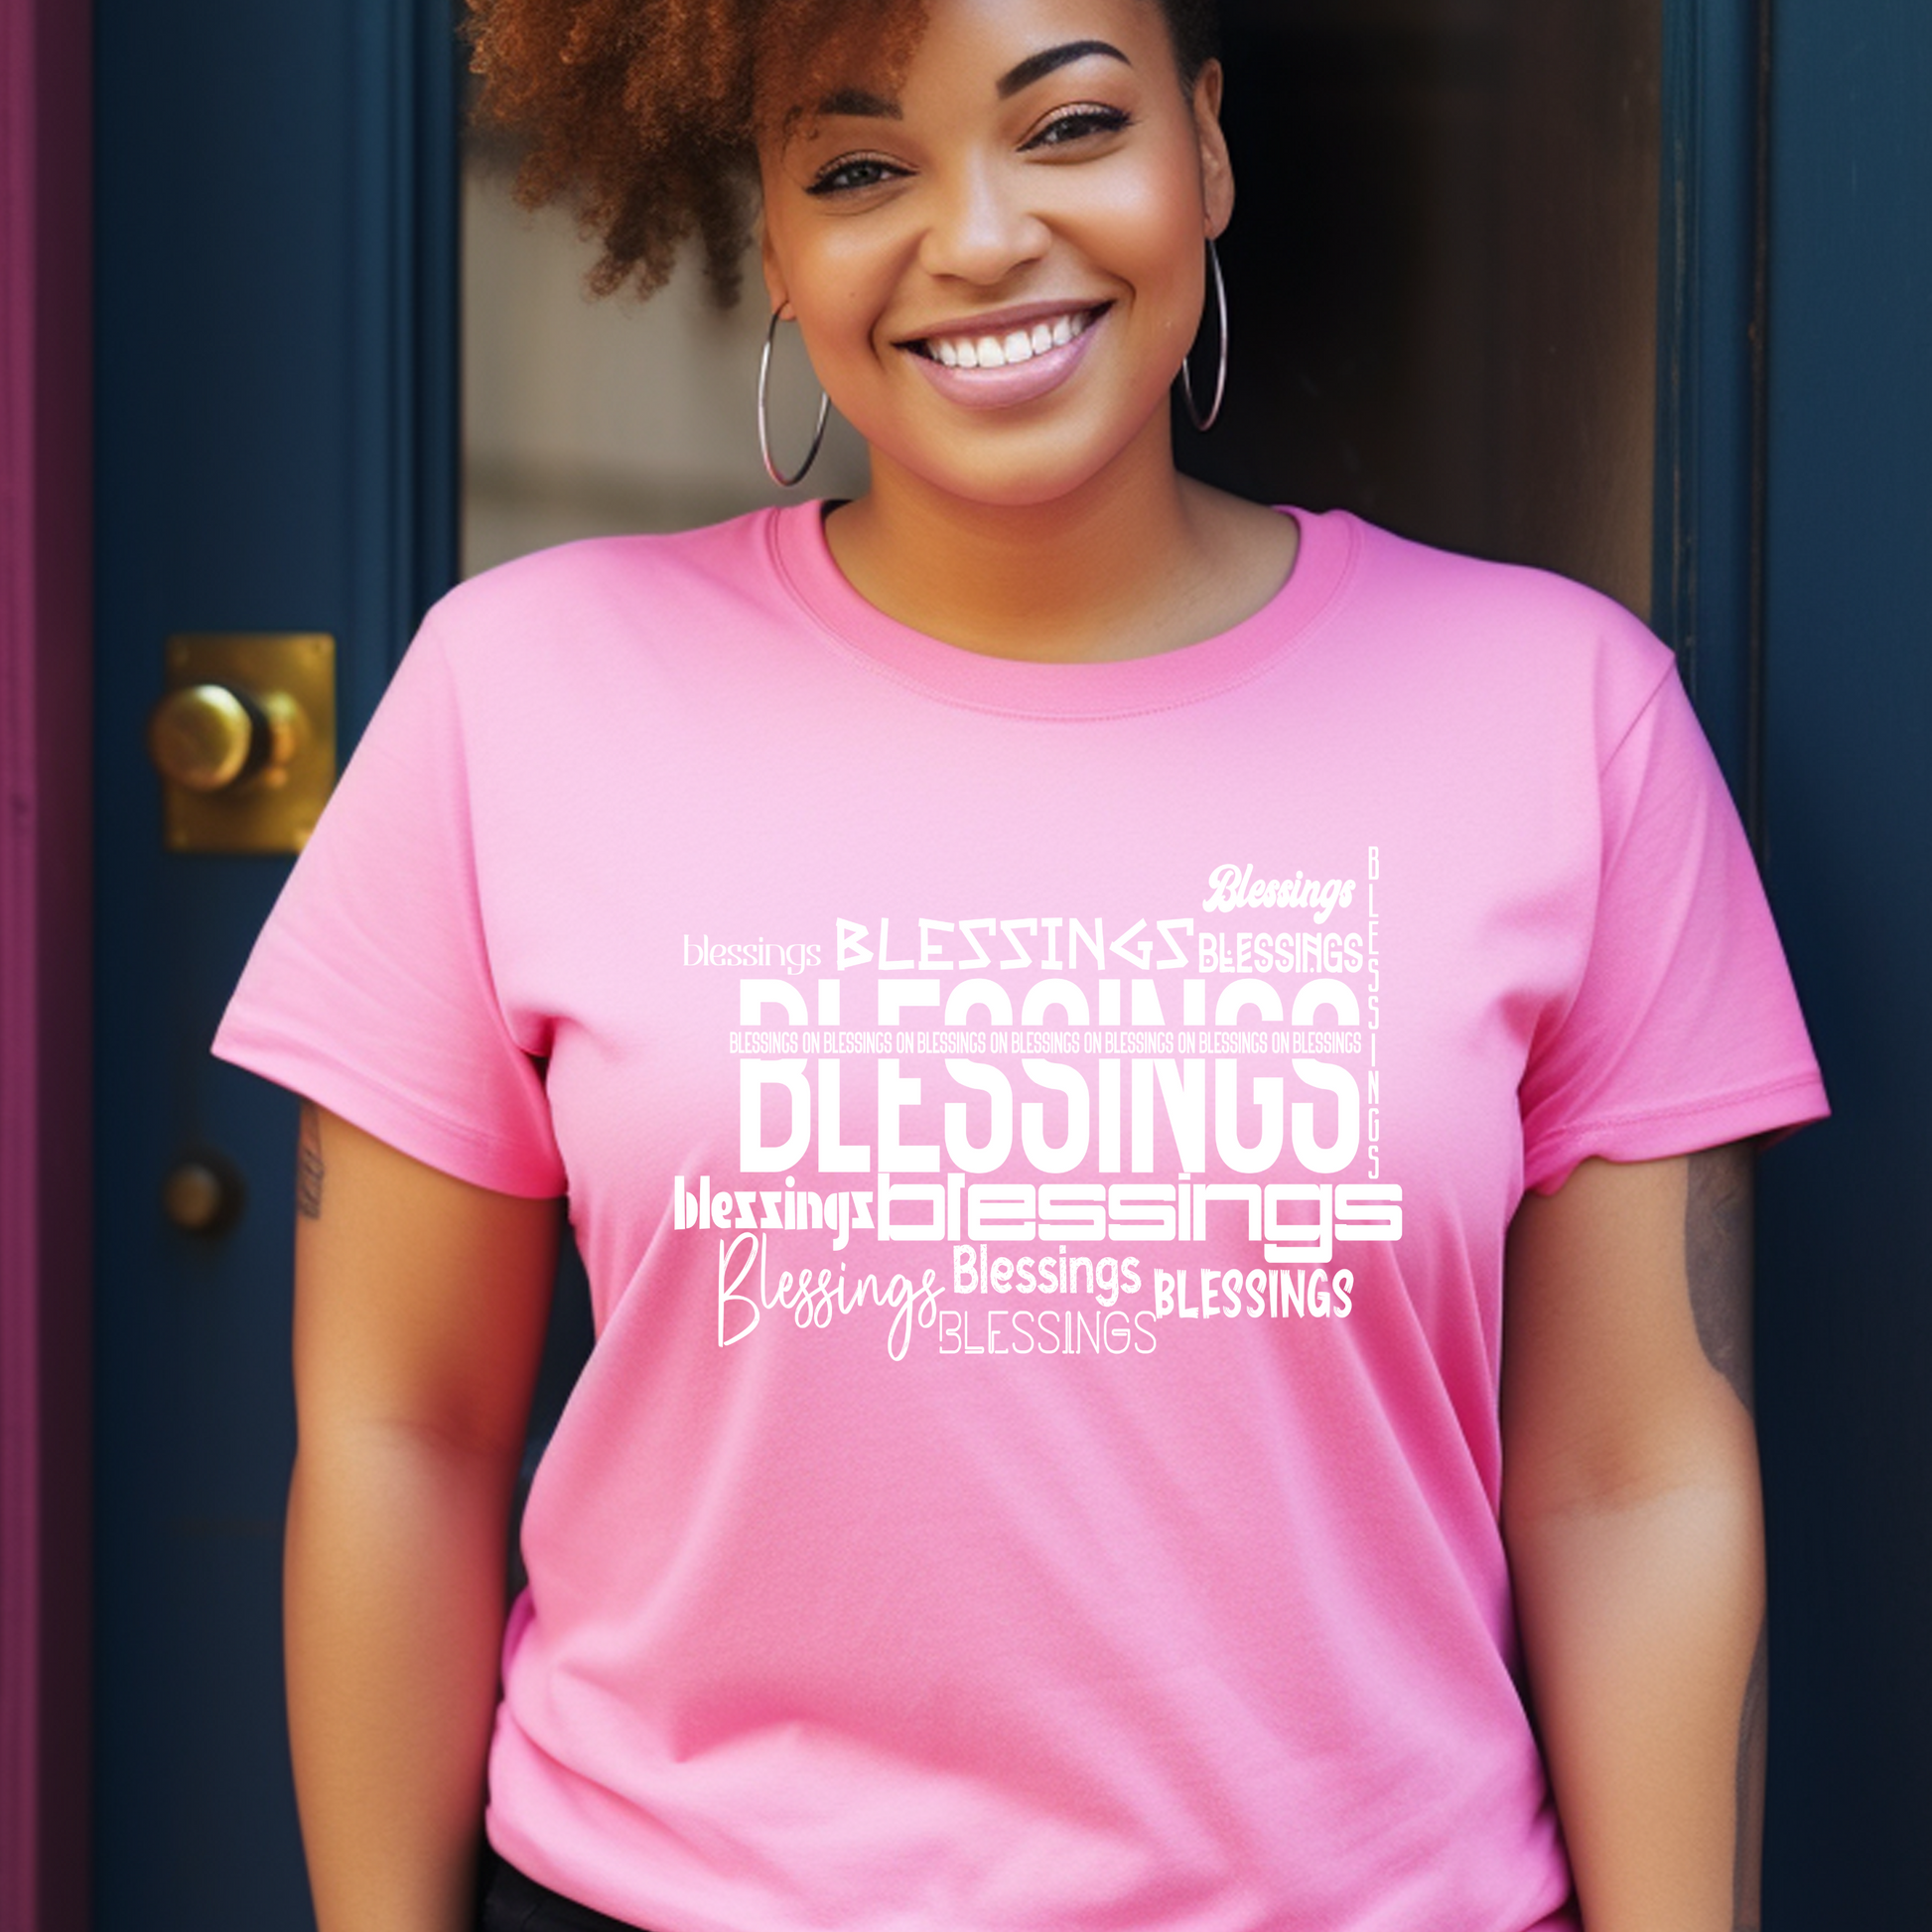 Chic pink 'Blessings on Blessings' T-shirt from Triumph Tees. This faith-themed apparel combines style and comfort, perfect for those wanting to express their faith in a fashionable way.